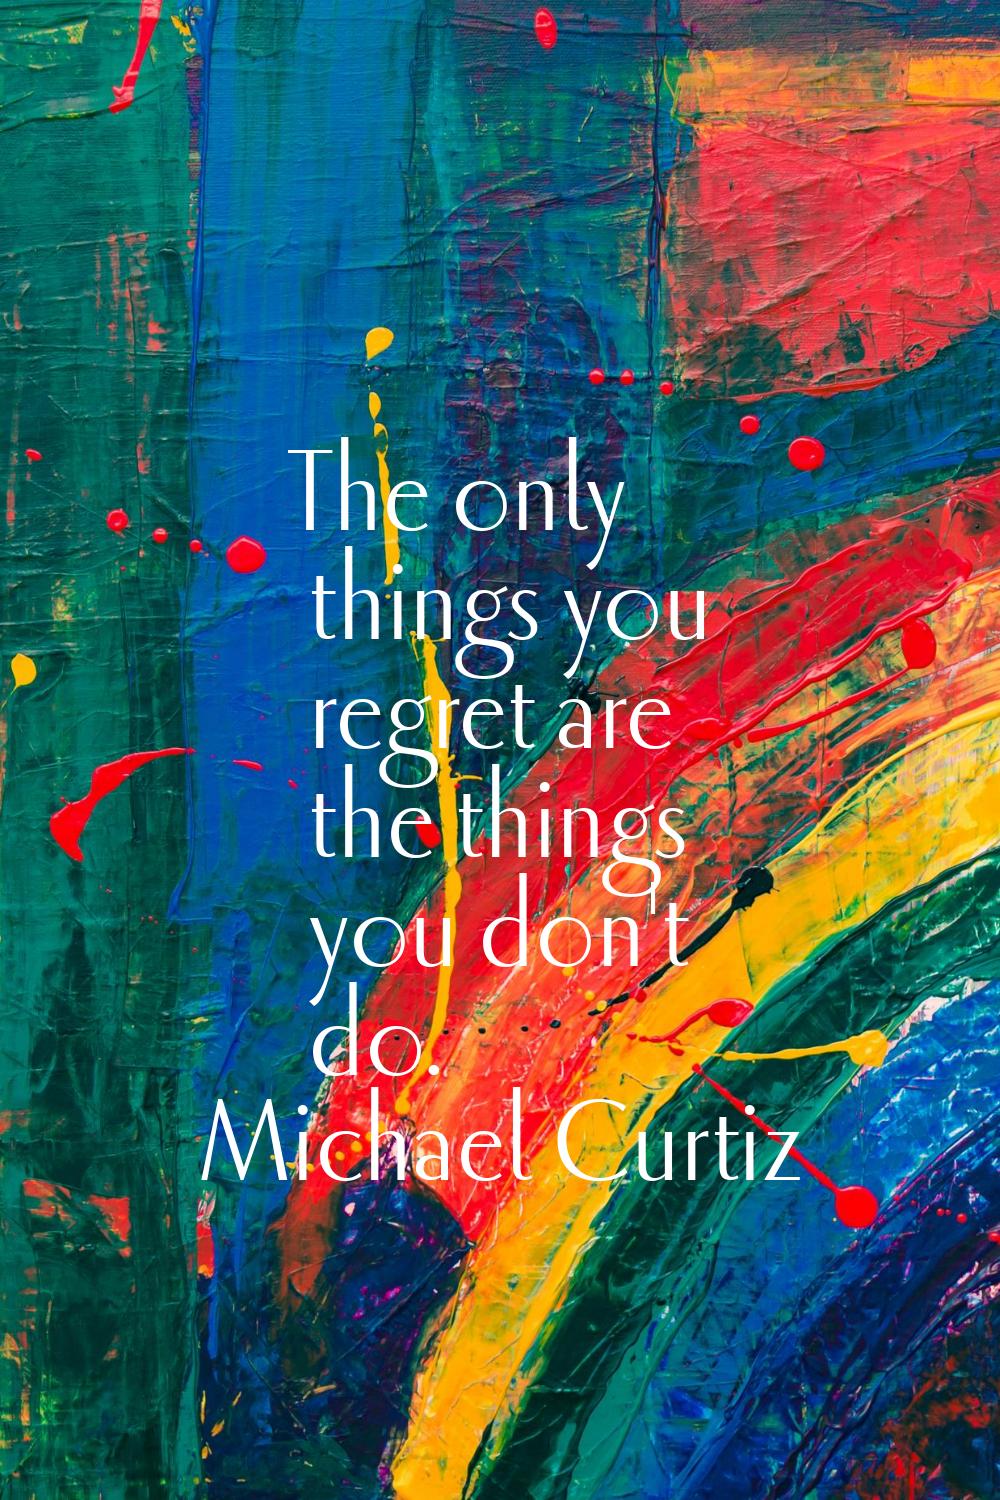 The only things you regret are the things you don't do.